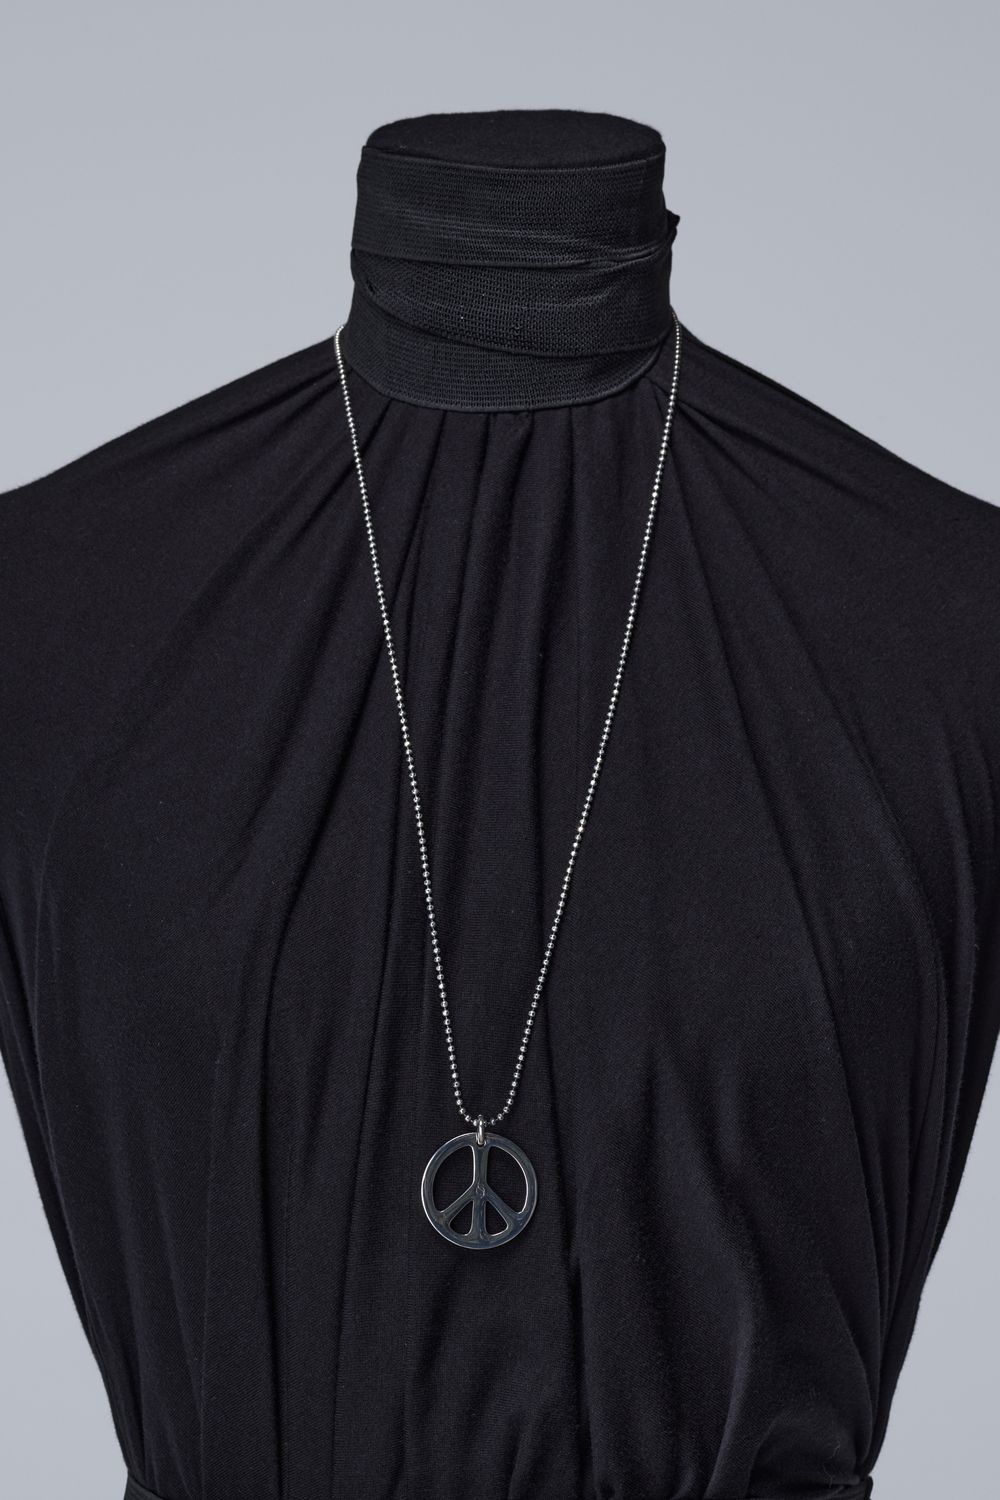 THE ONENESS - SGZ-PEACE Necklace / SUGIZO ピース ネックレス